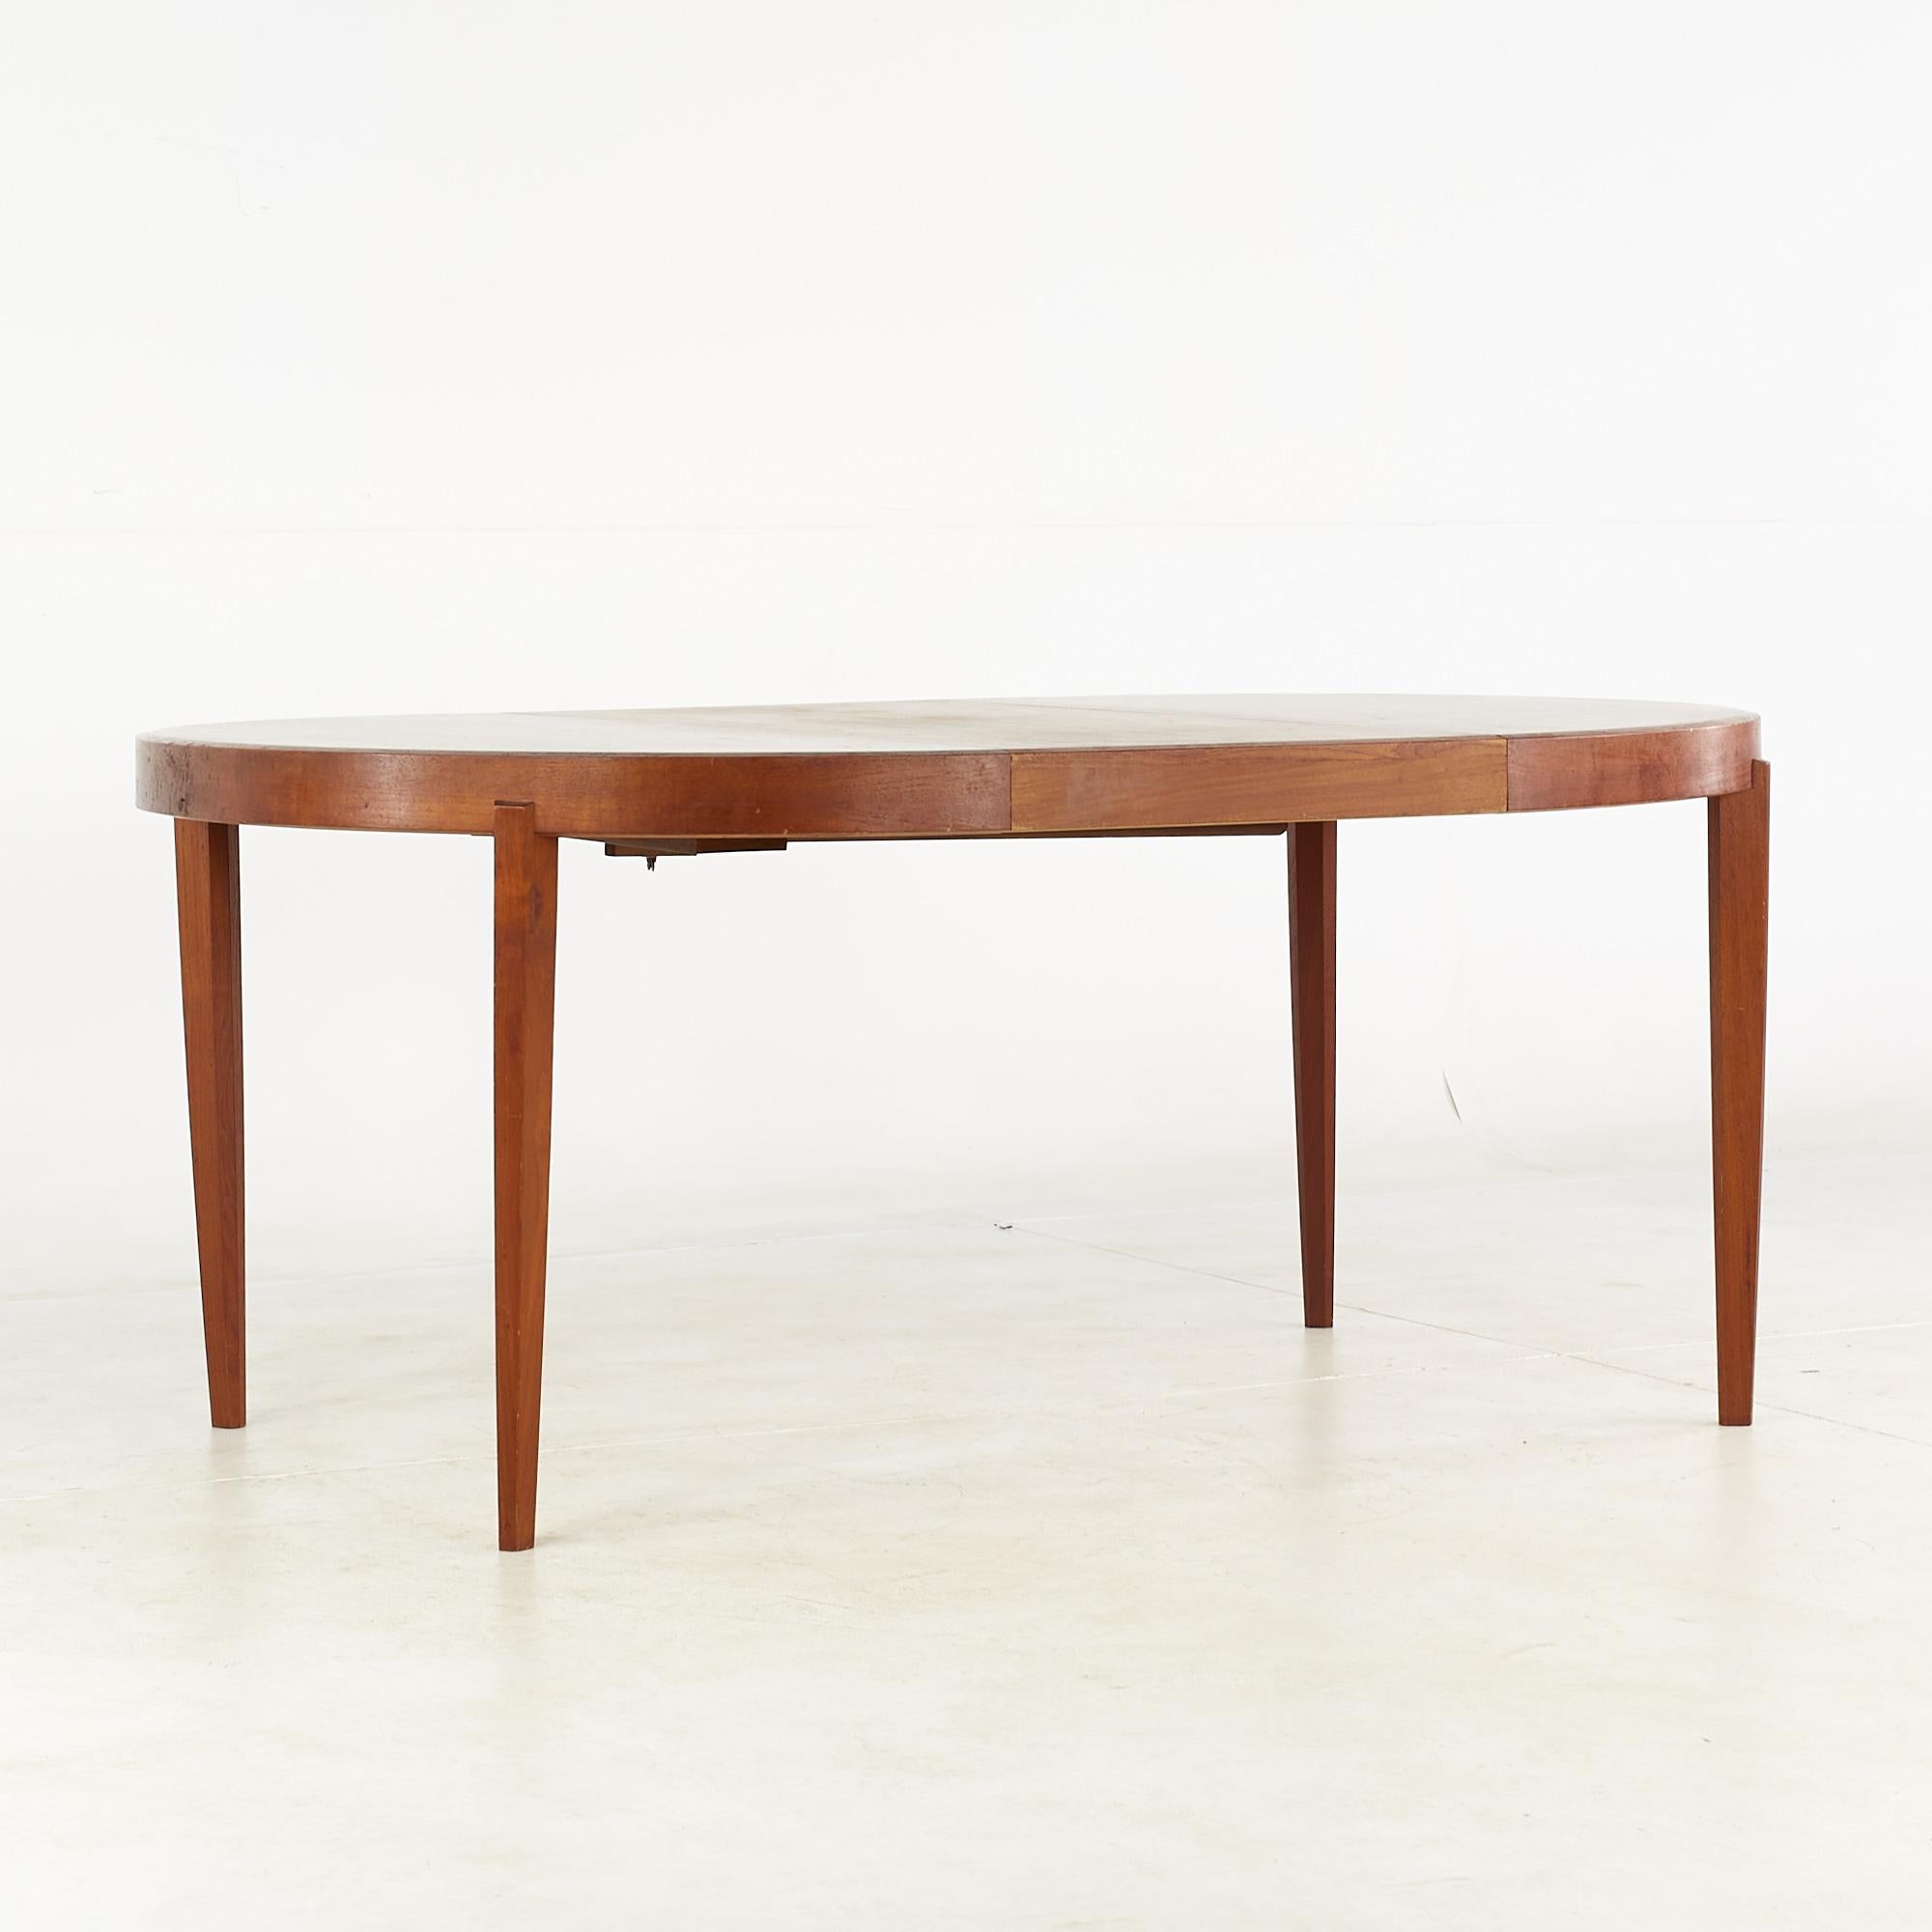 Late 20th Century Johannes Andersen Style Mid-Century Teak Expanding Dining Table with 4 Leaves